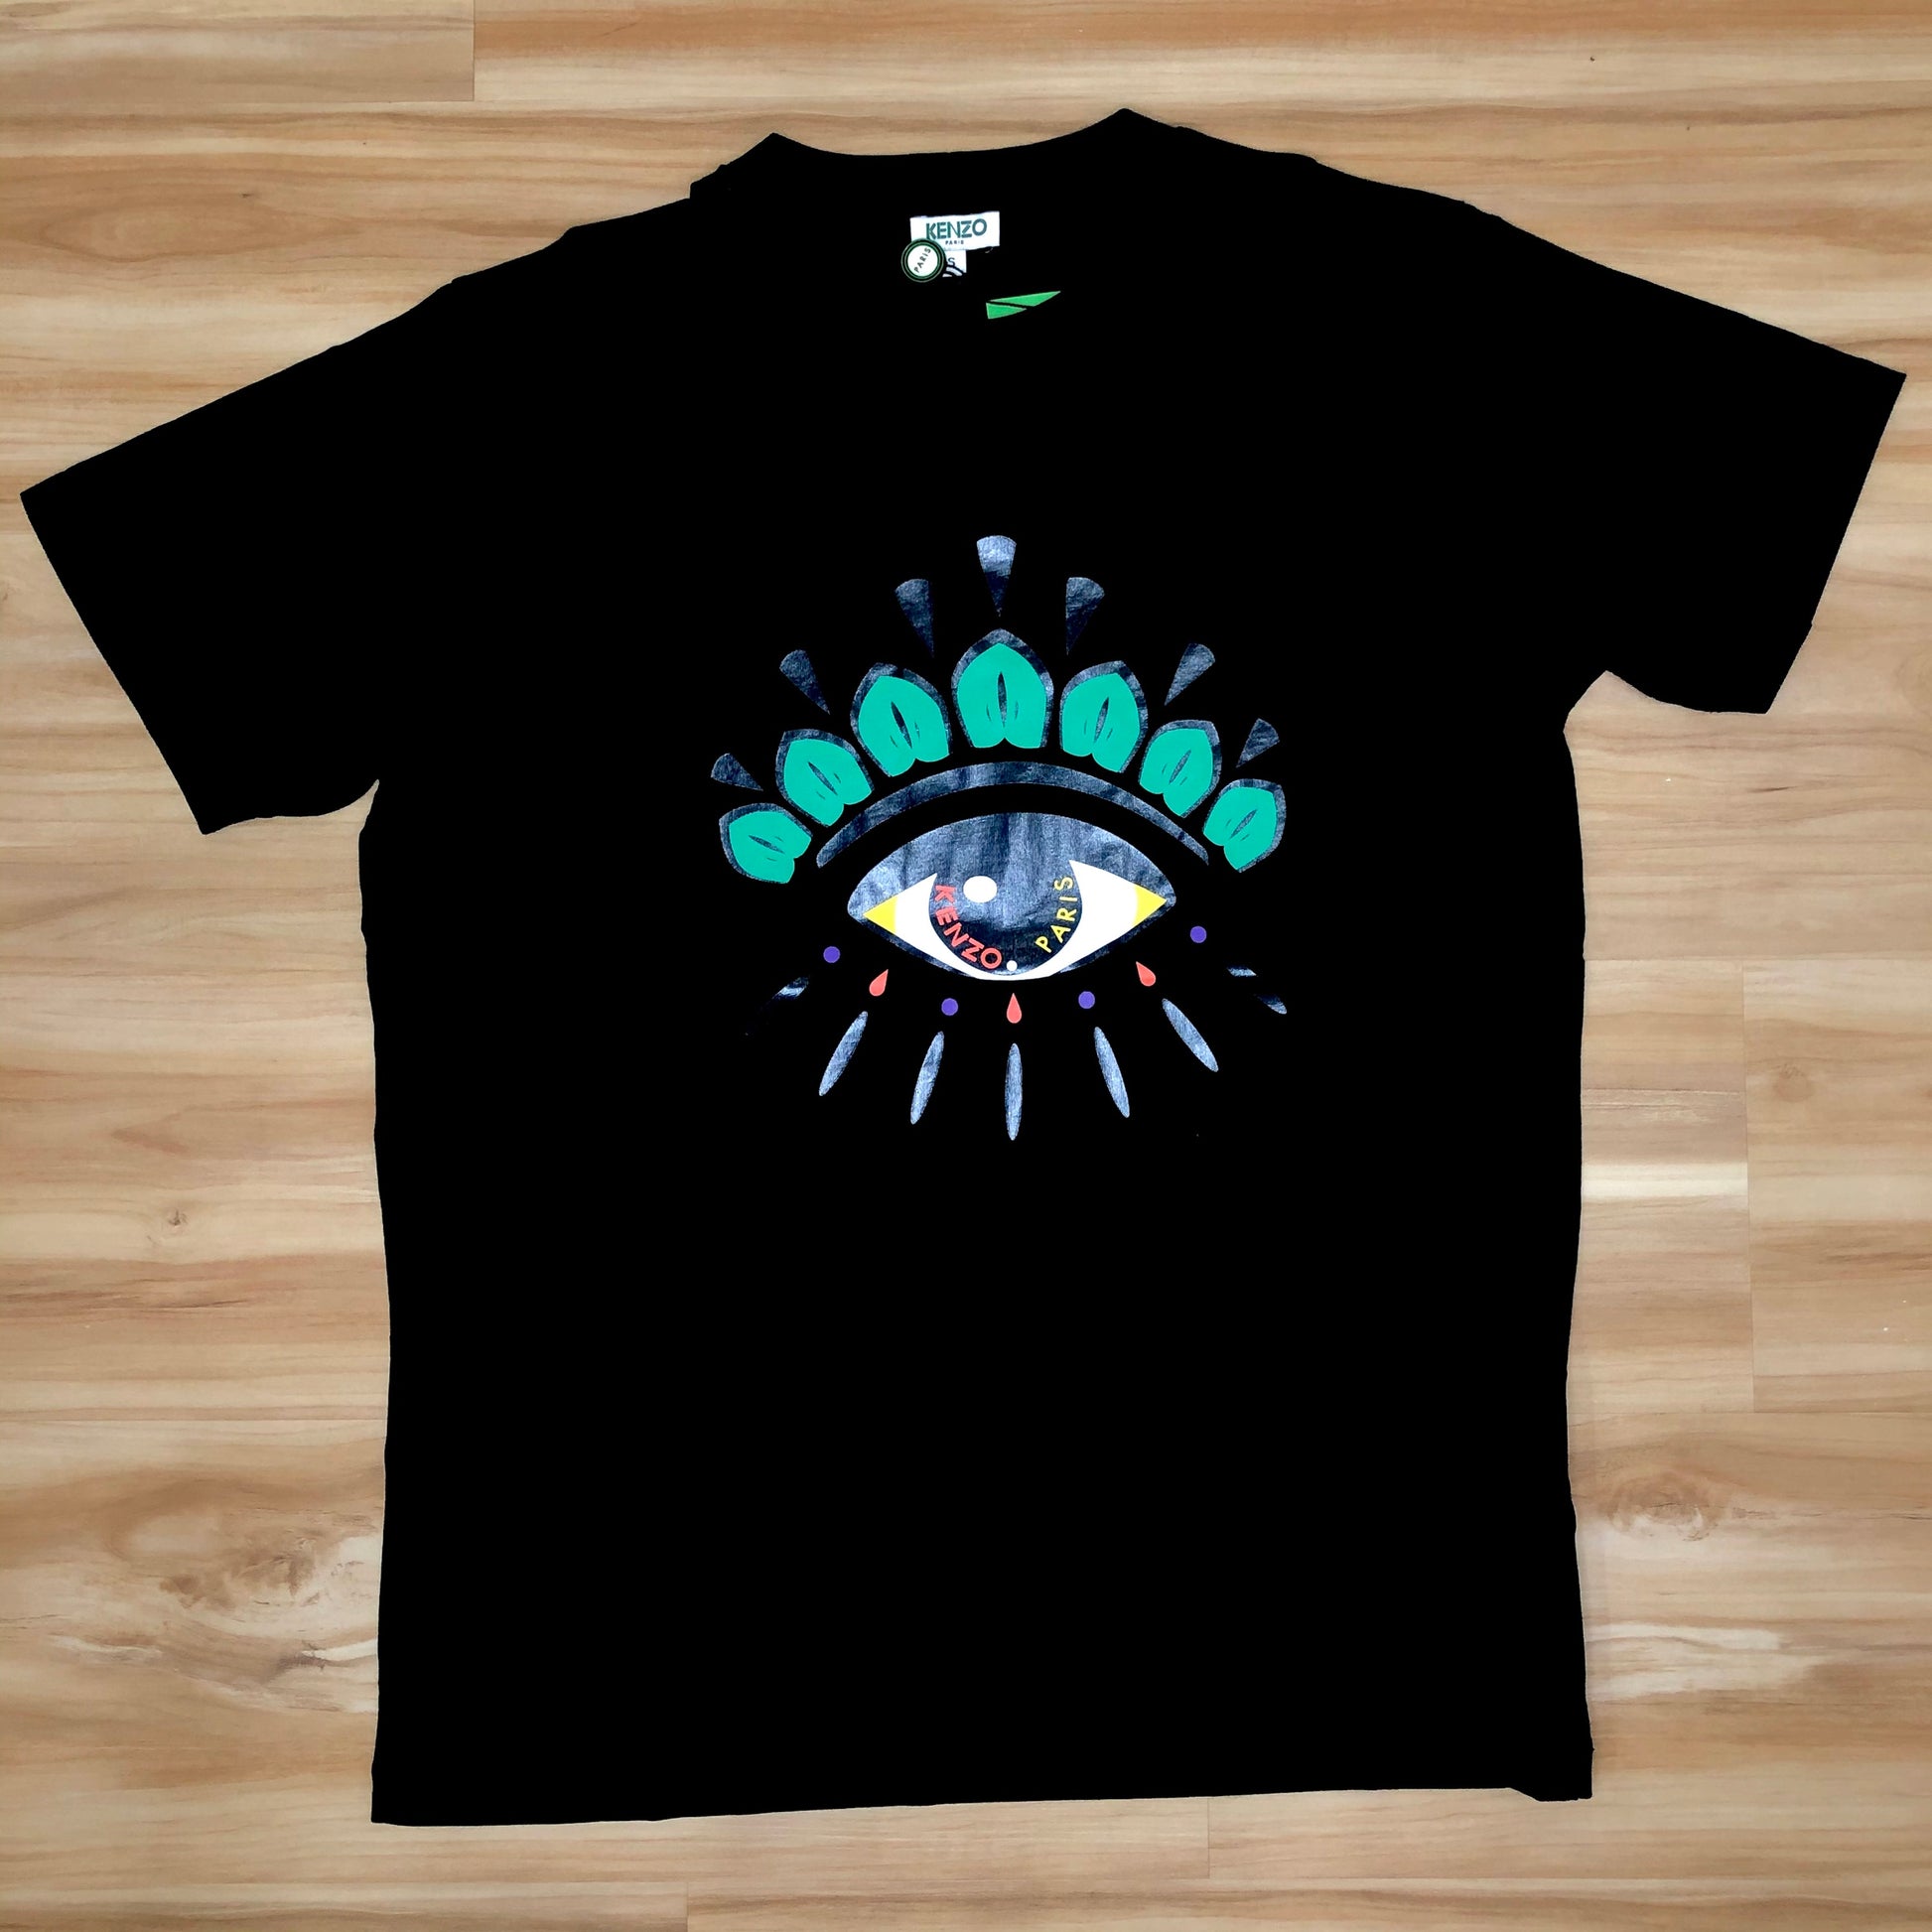 Kenzo Green Eye Logo Holiday Edition T-Shirt - Shop Streetwear, Sneakers, Slippers and Gifts online | Malaysia - The Factory KL